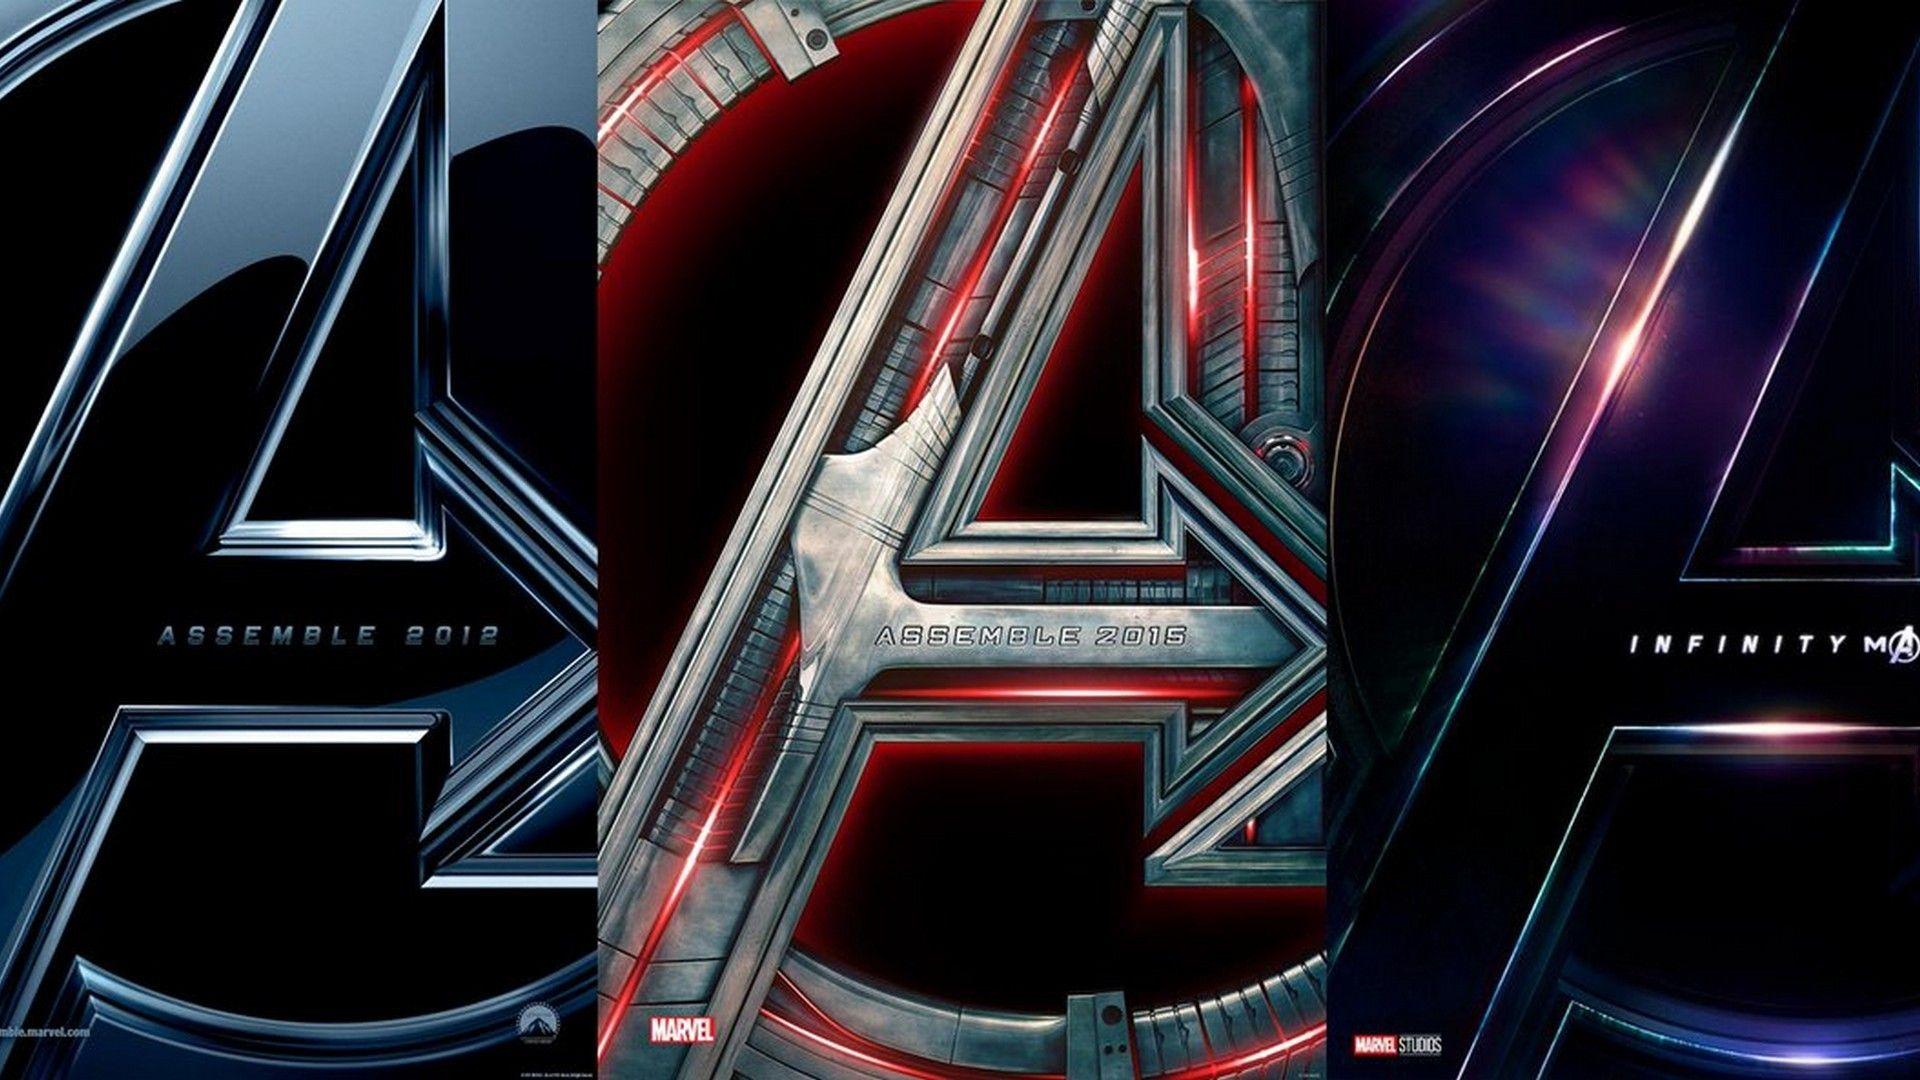 Avengers Logo Wallpaper, image collections of wallpaper